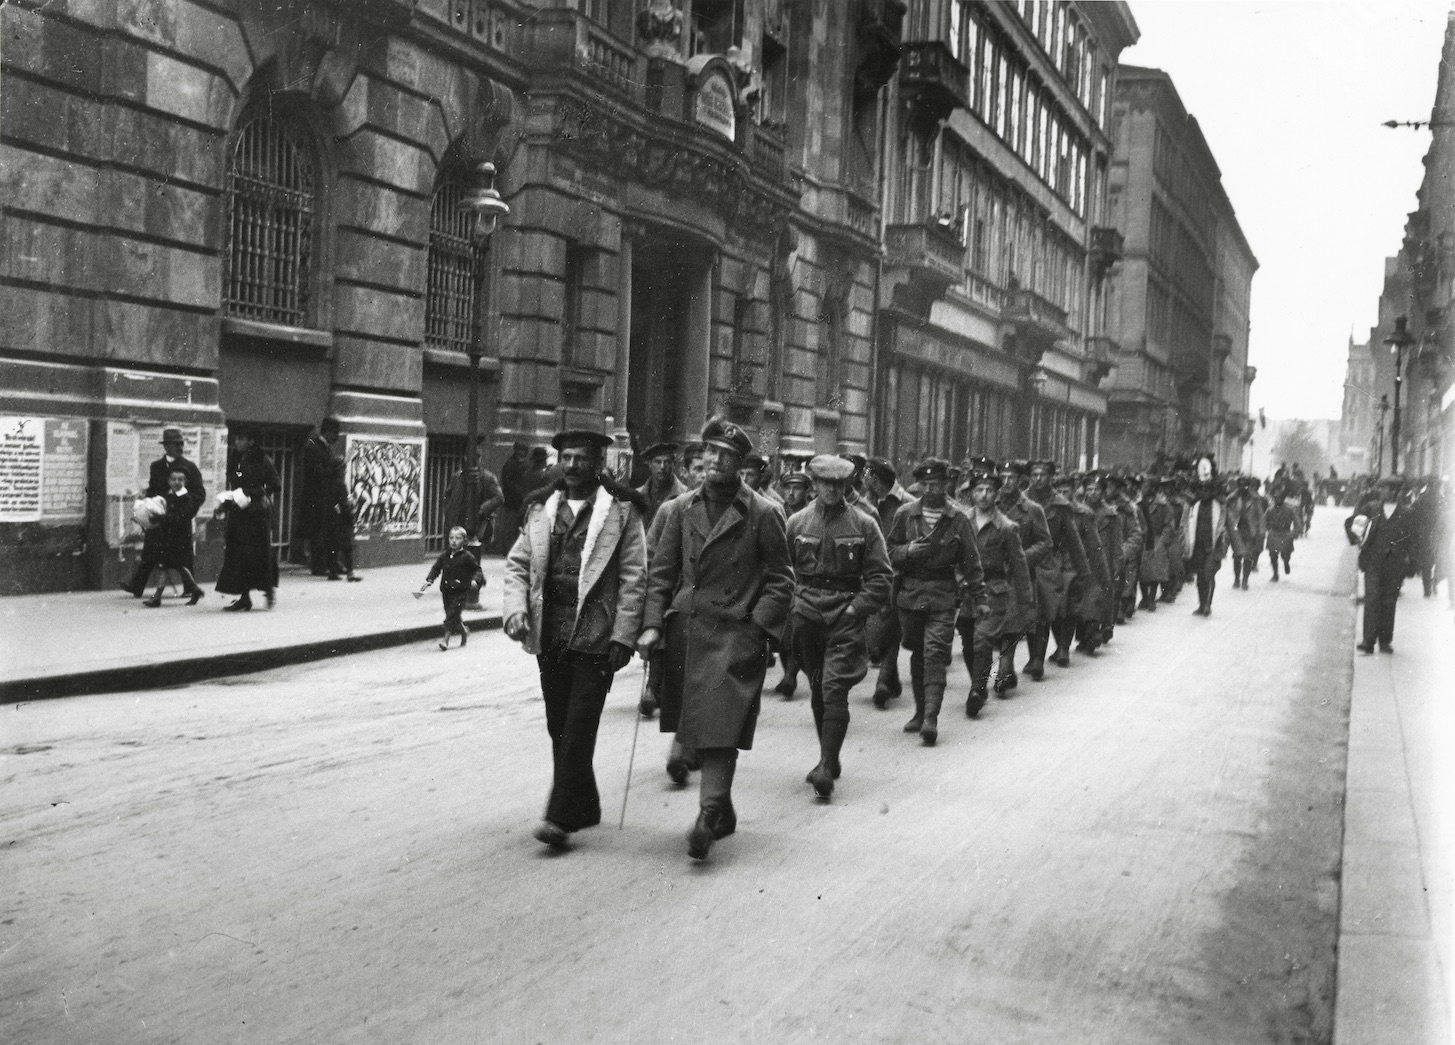 André Kertész: Budapest 1919 (Red soldiers marching, ca. April 1919) (The Salgo Trust for Education CC BY-NC-SA)